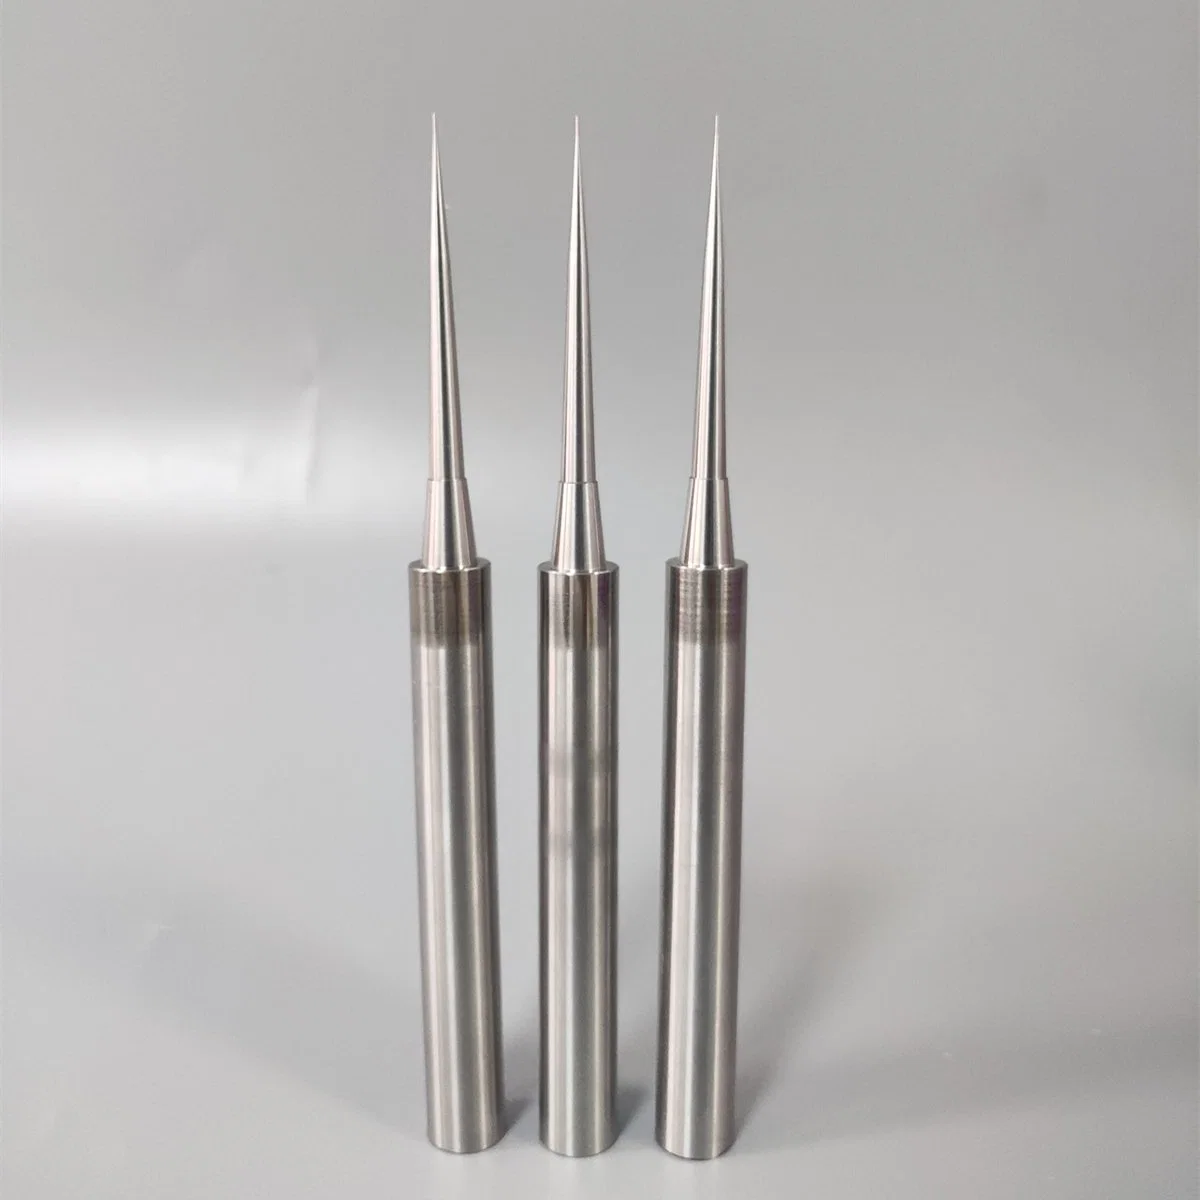 Non Standard Mold Core Pins Ejector Insert Pins for Injection Mould